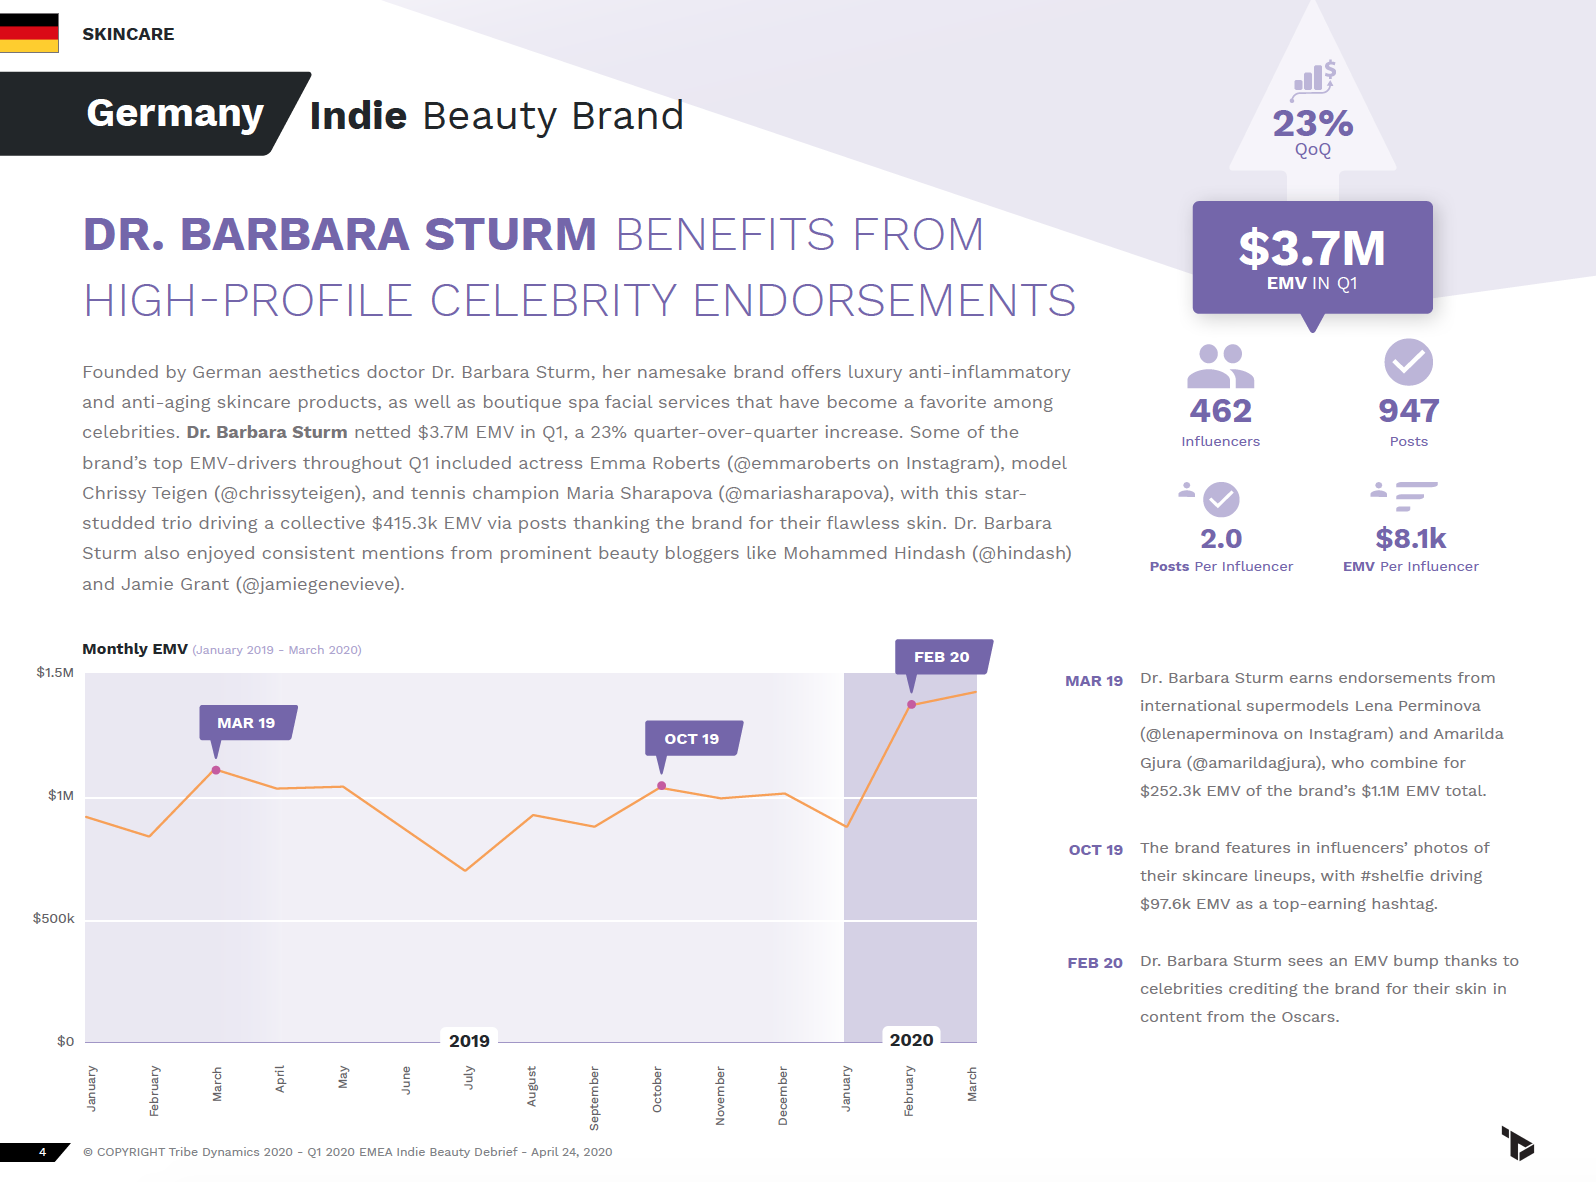 A page from the Q1 EMEA Indie Beauty Debrief, featuring insights into Dr. Barbara Sturm's EMV performance and influencer strategy this quarter.